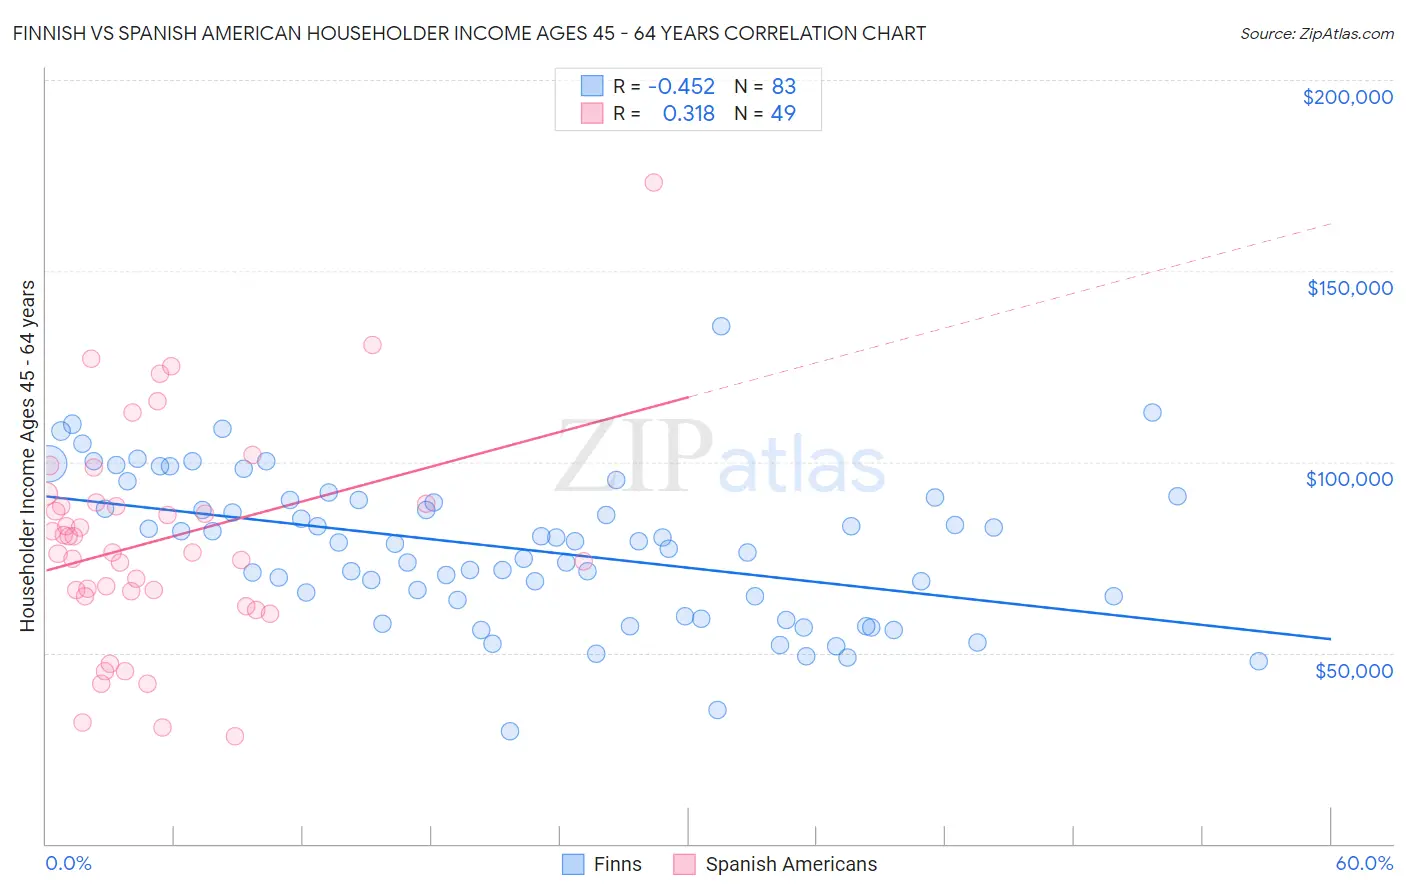 Finnish vs Spanish American Householder Income Ages 45 - 64 years